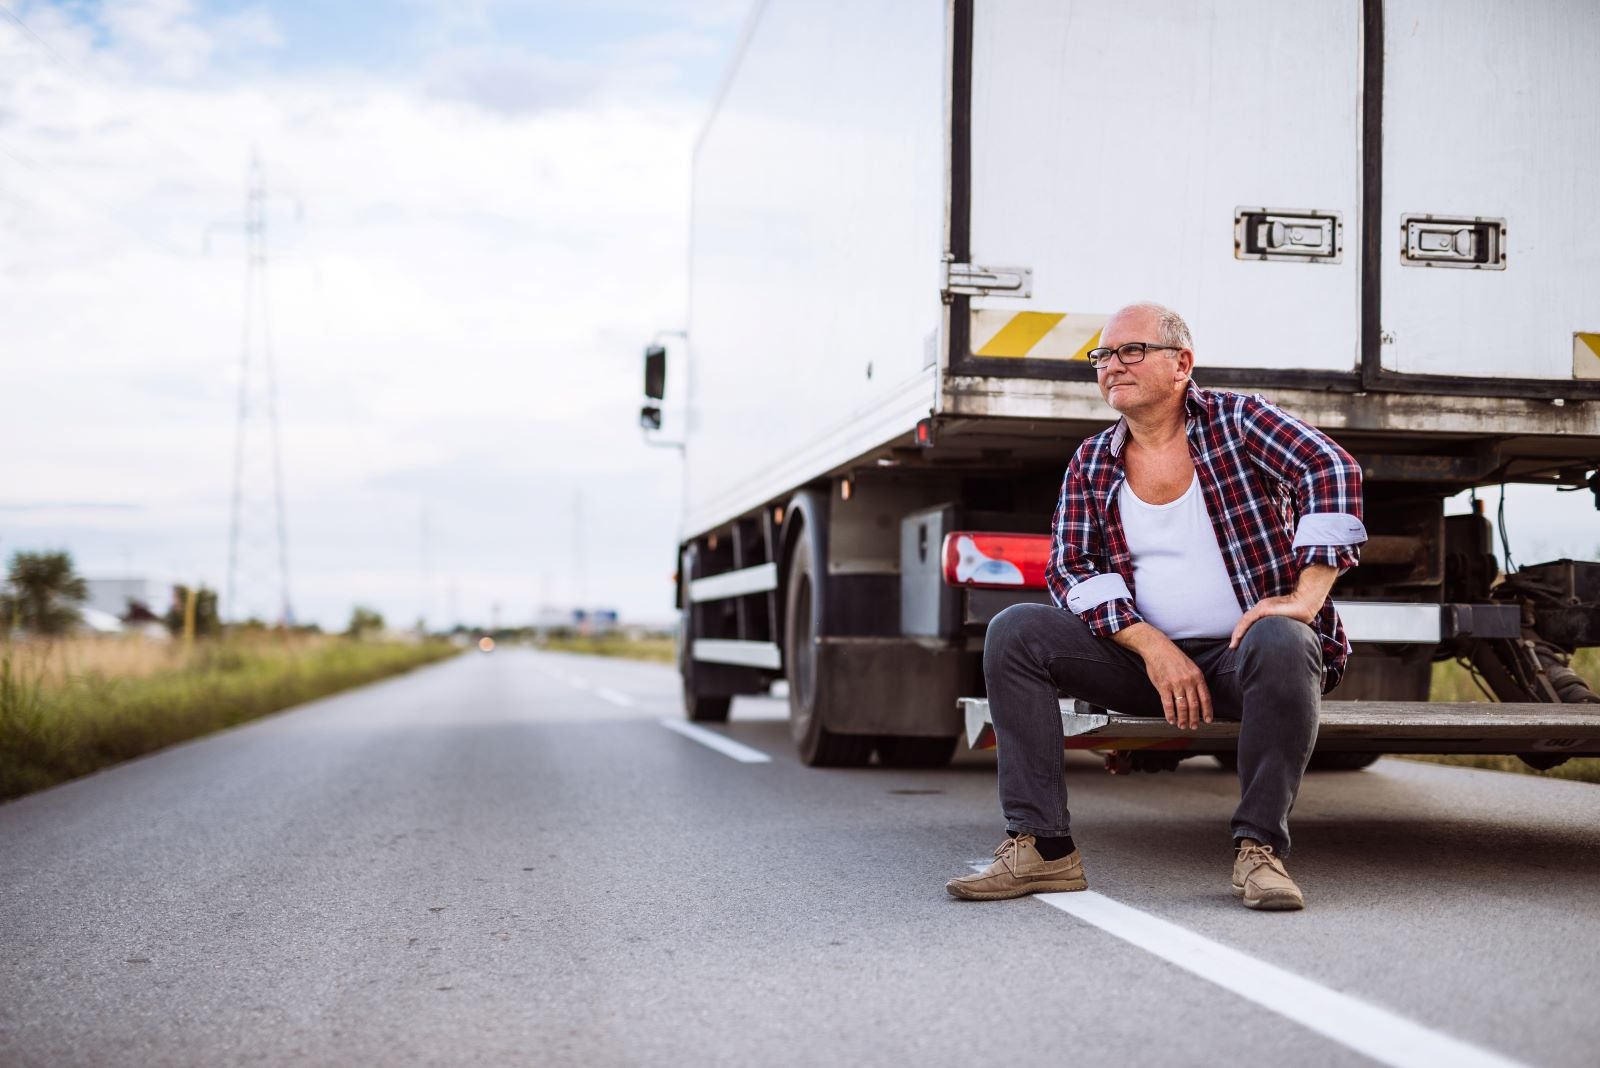 Road safety is a complex issue, and accidents can happen anywhere. This list is not intended to be exhaustive or definitive but rather to raise awareness of some of the most challenging roads for truckers.